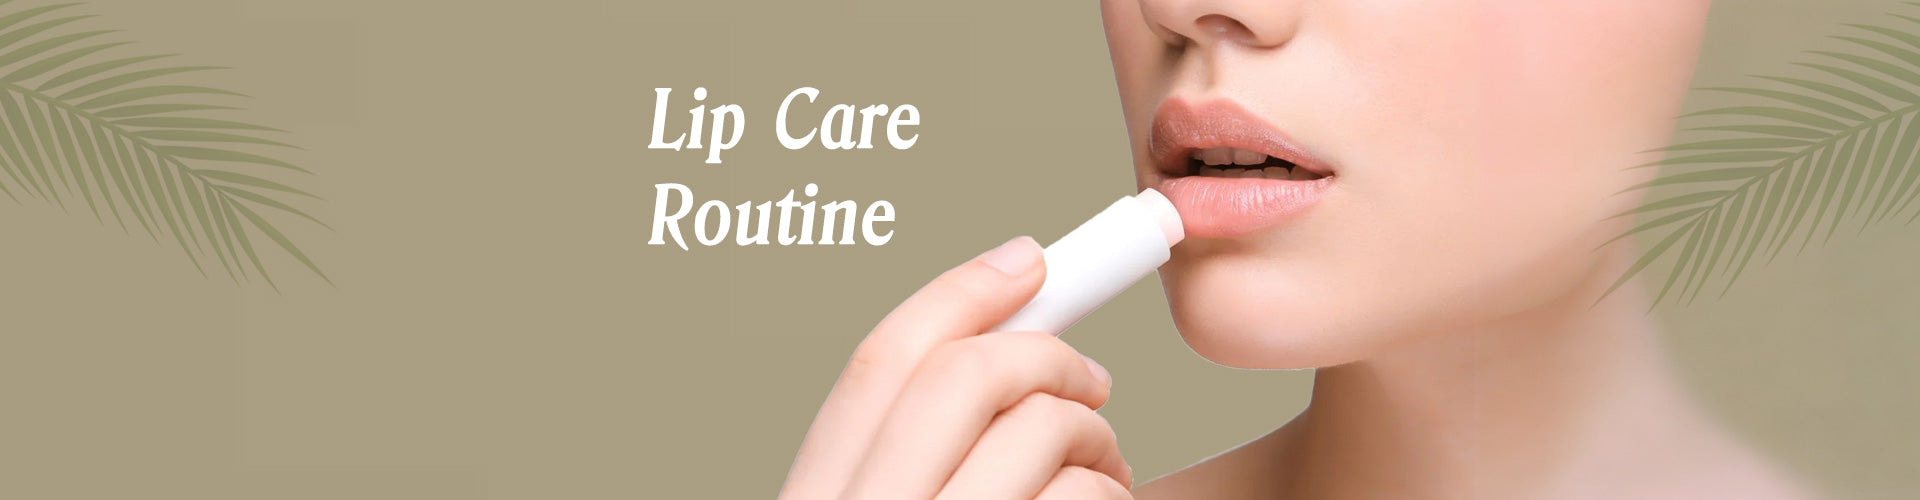 Lip Care Routine for Softer and Healthier Lips